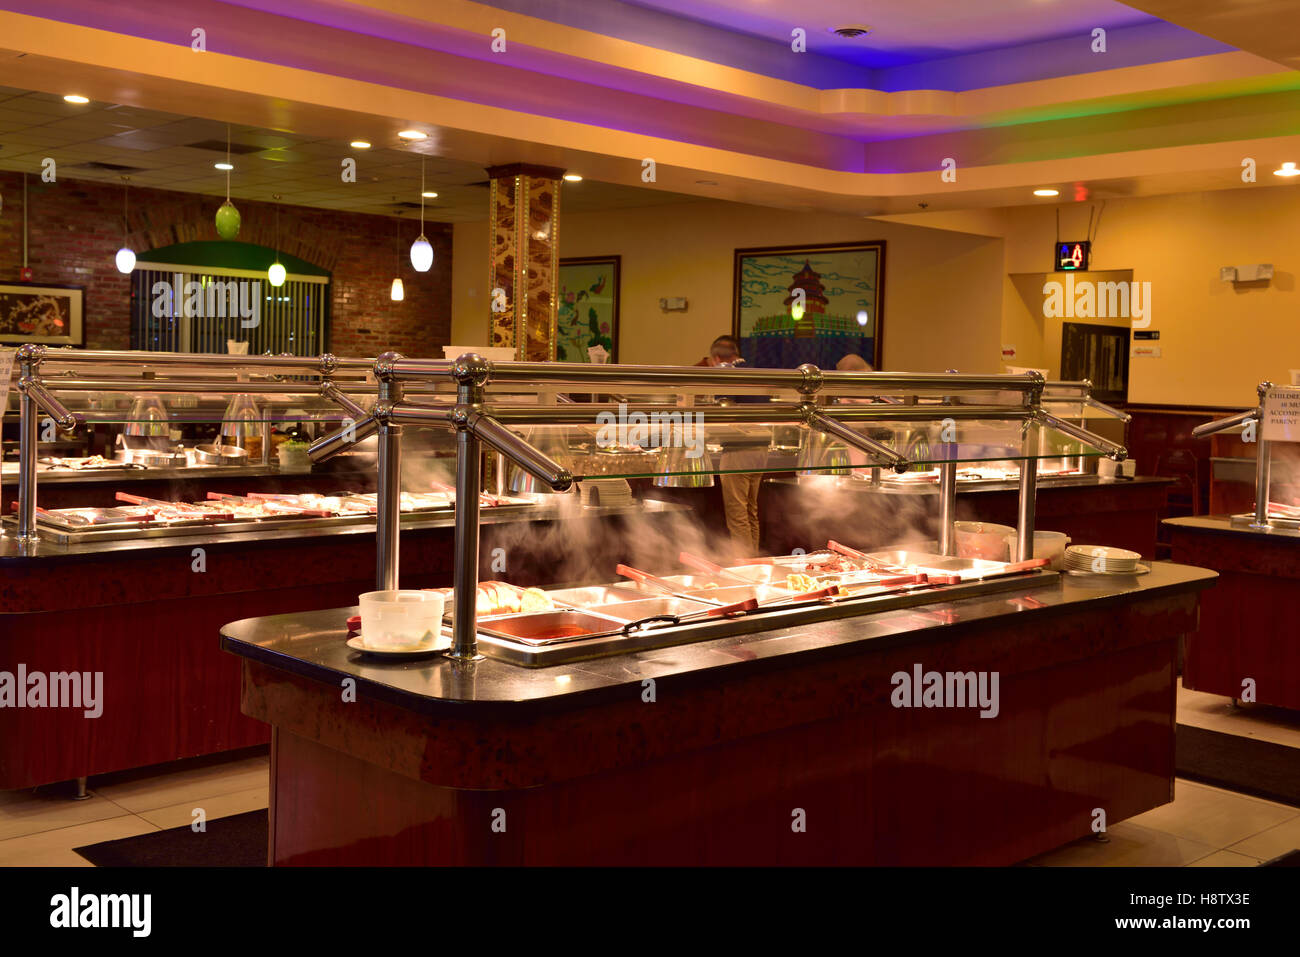 Self service buffet style food display in Chinese “all you can eat” restaurant, Chicago, Il, USA Stock Photo